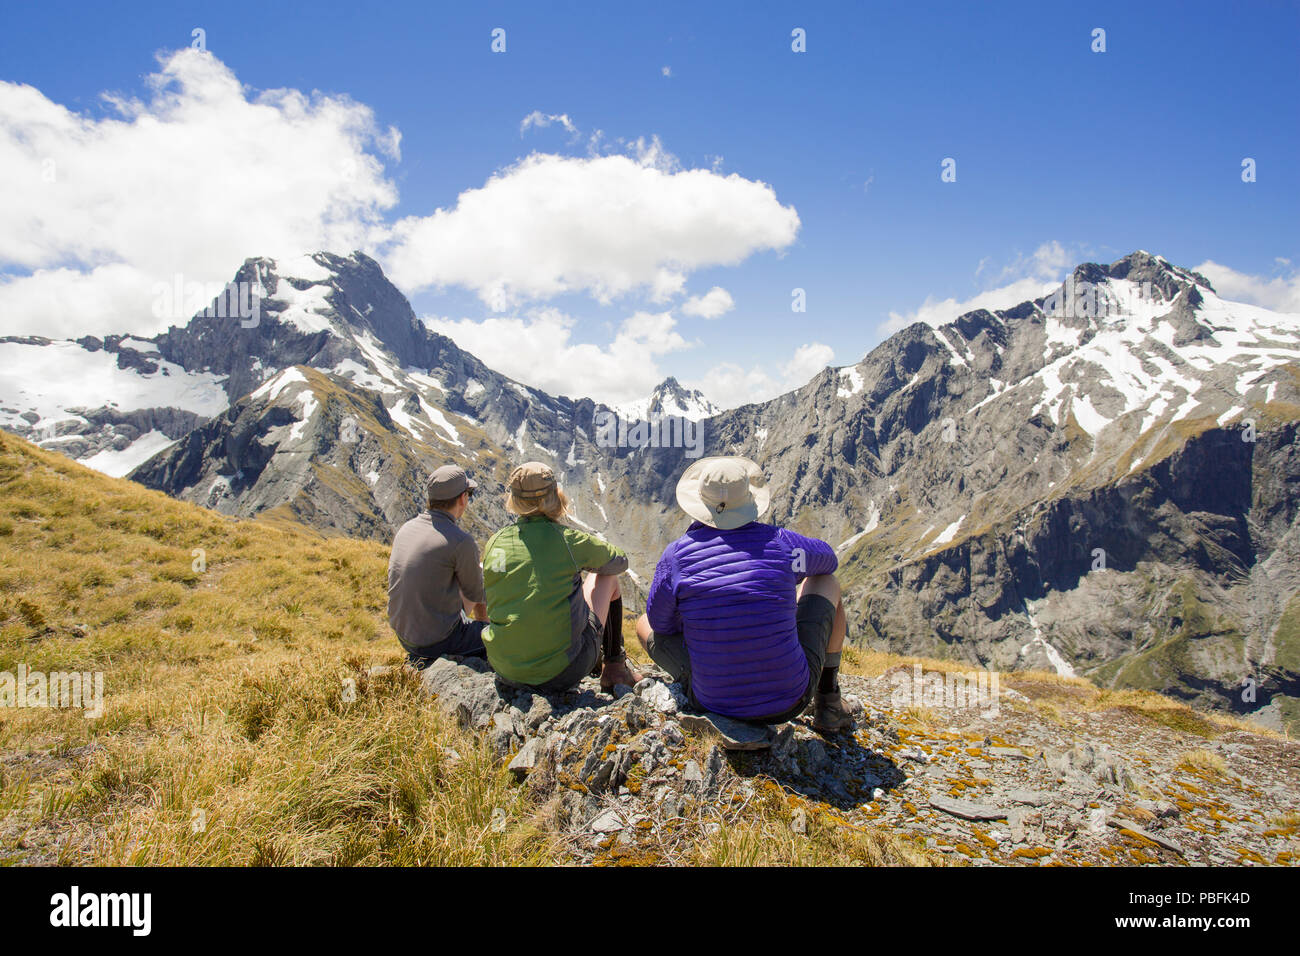 New Zealand aka Aotearoa, South Island, Mt Aspiring National Park, Gillespie Pass, trampers with scenic view of Mt Awful. Model released. Stock Photo